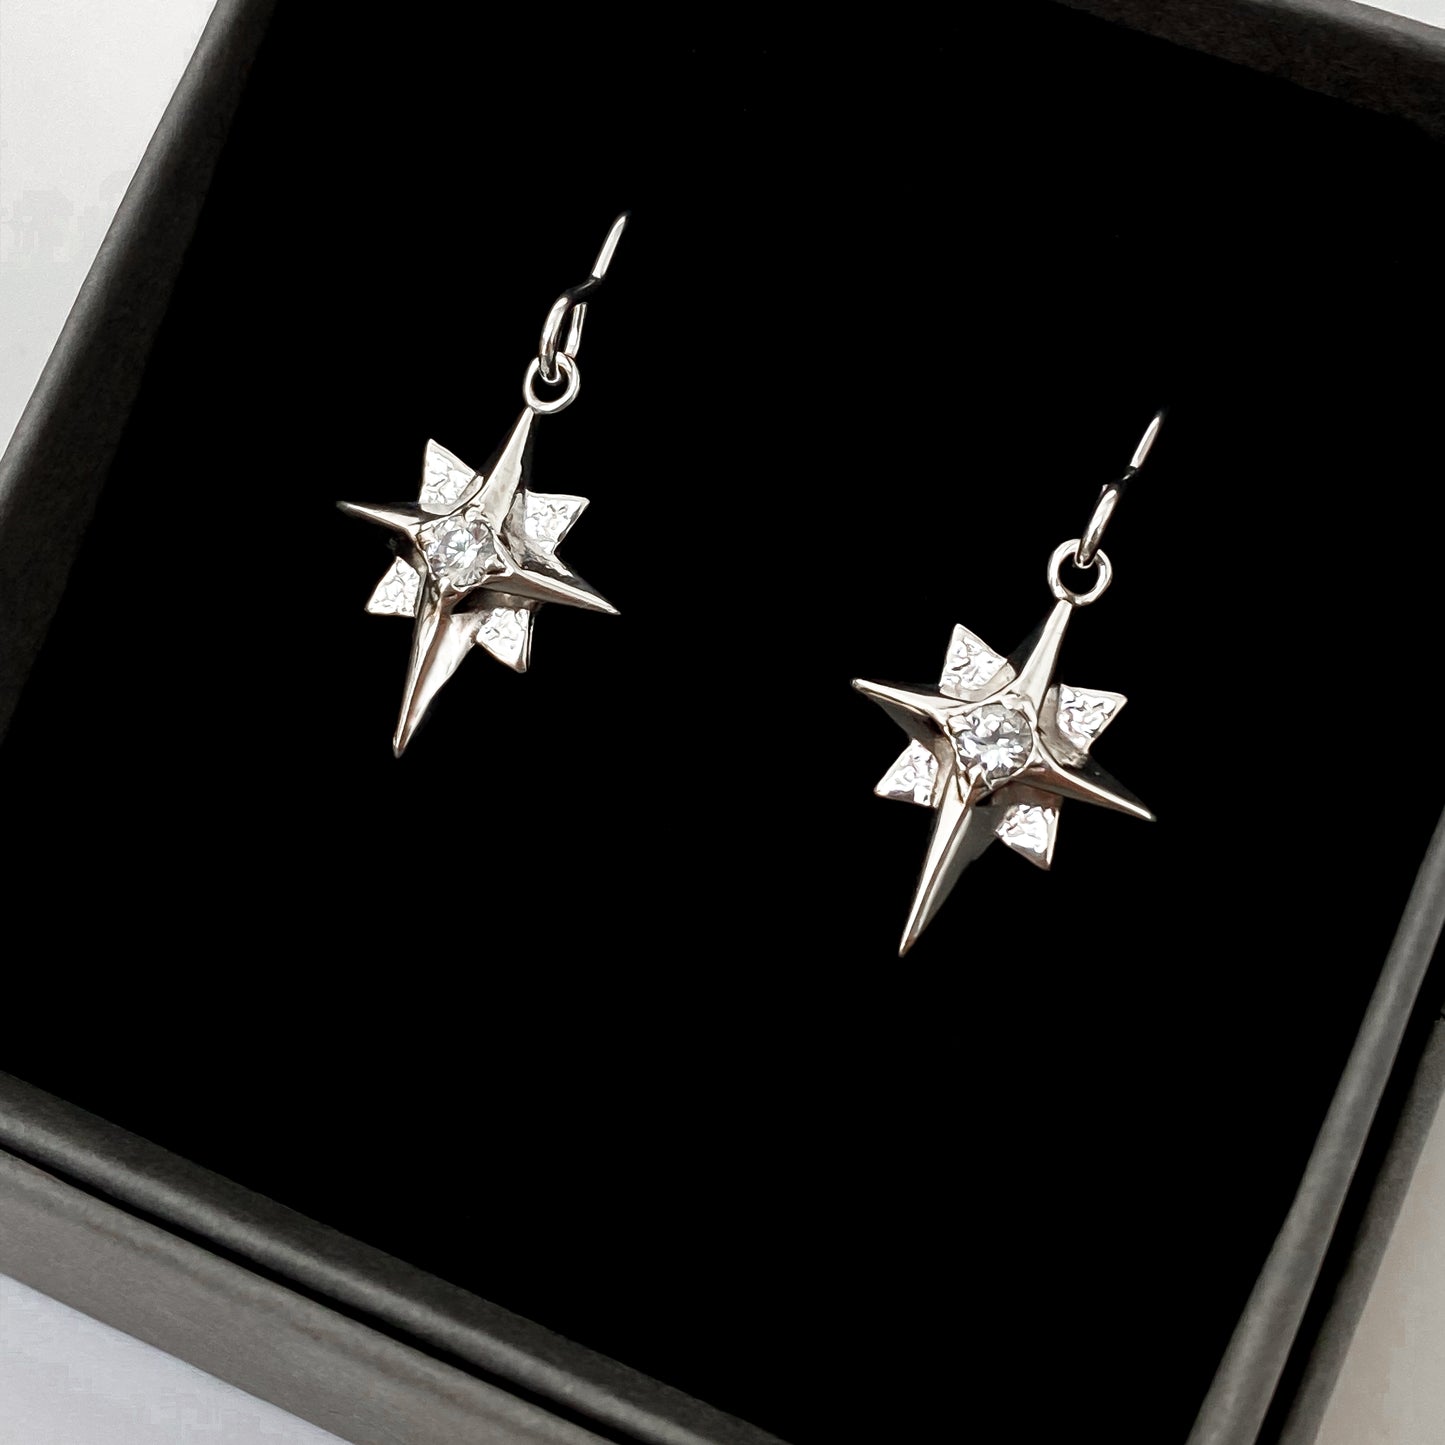 North Star Sterling Silver Earrings with White Topaz